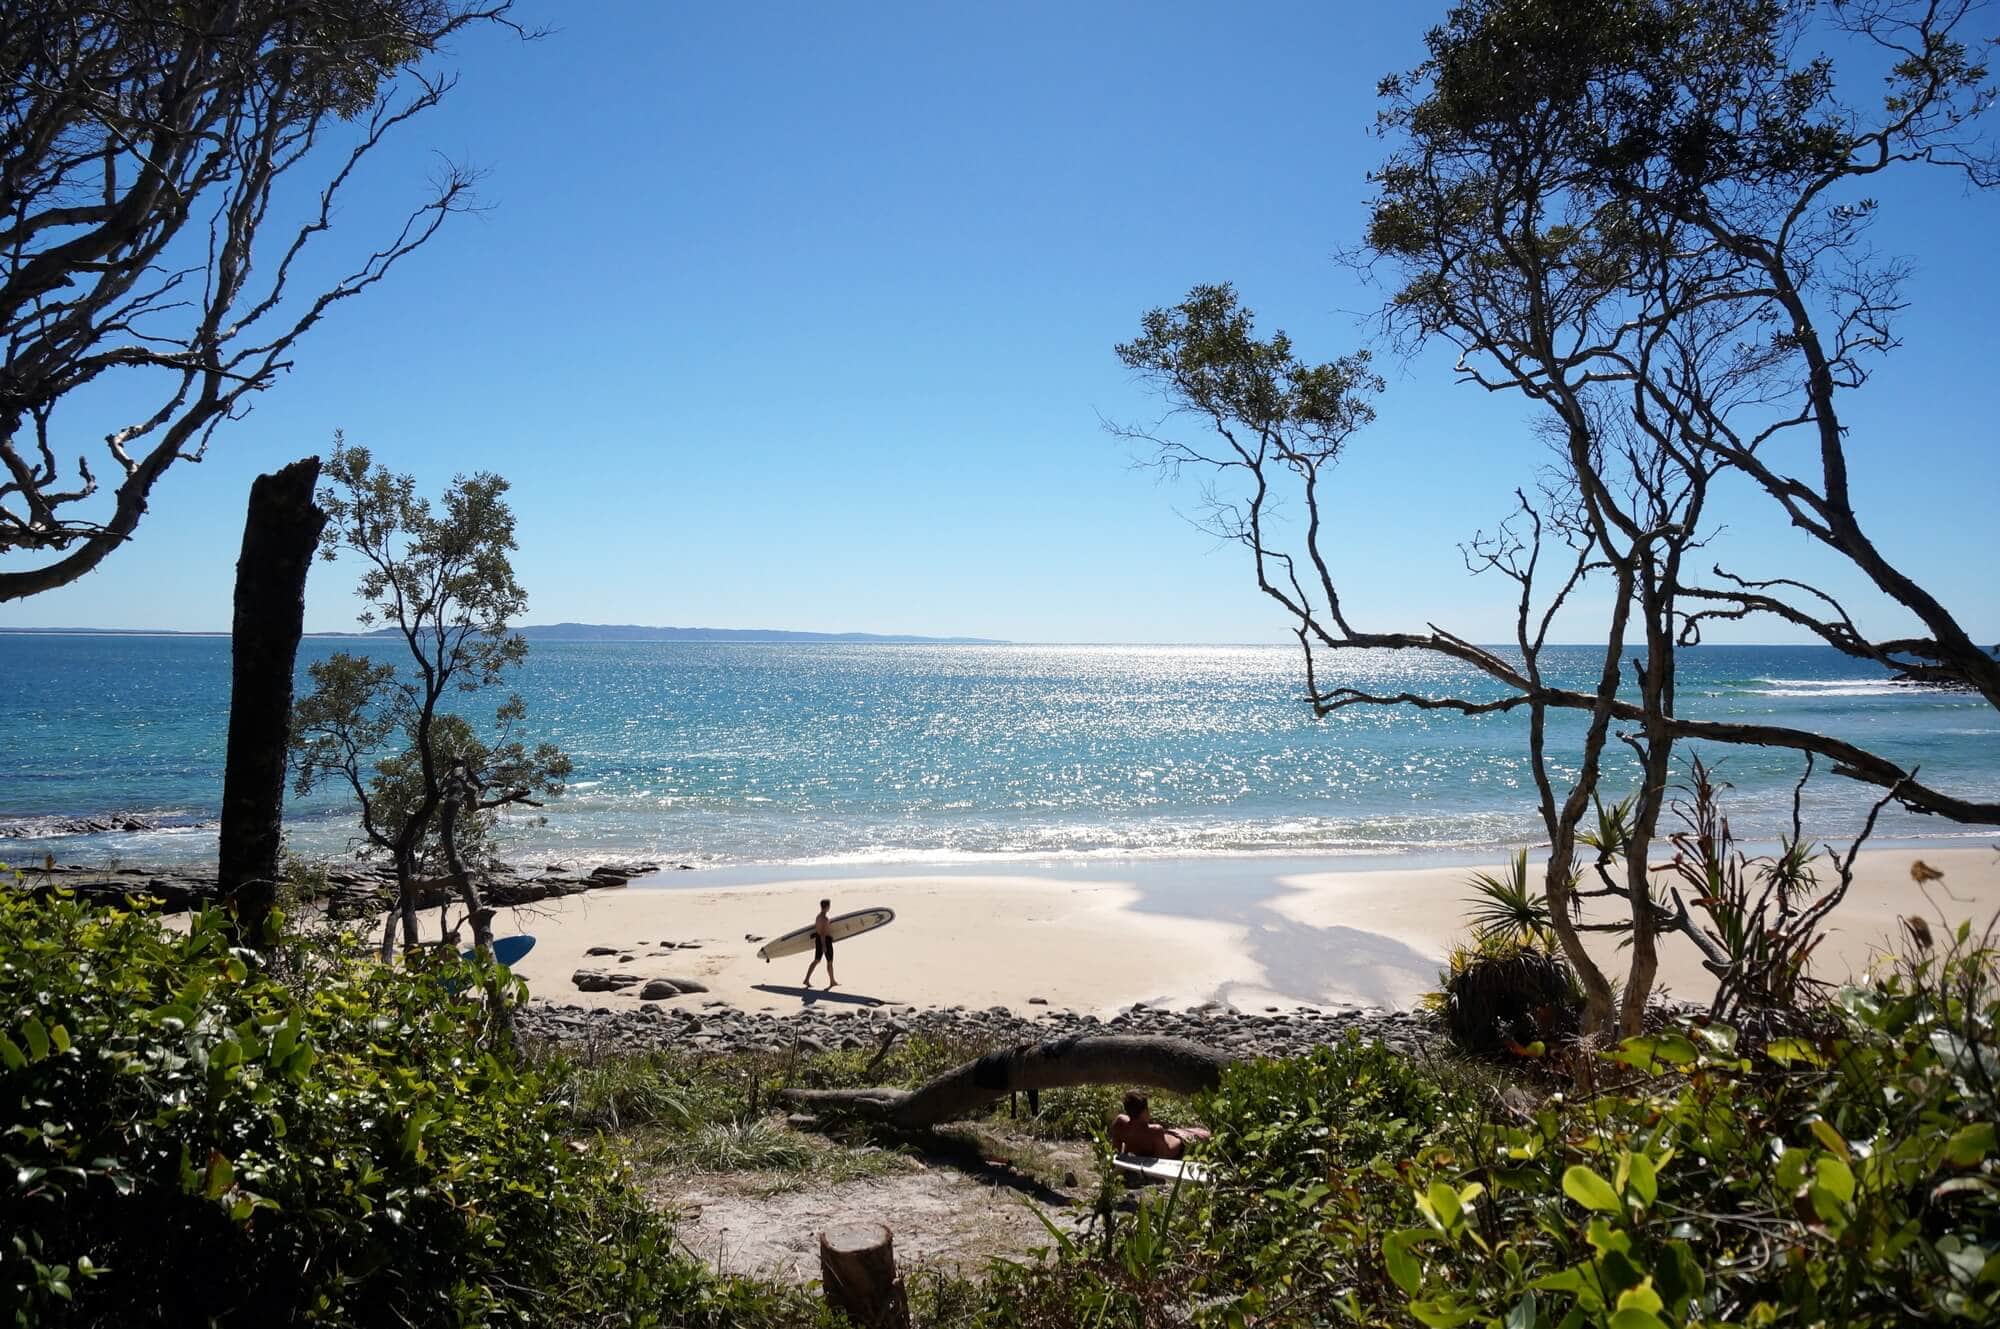 Learn to surf at Noosa's Main Beach - one of the best things to do in Noosa Australia